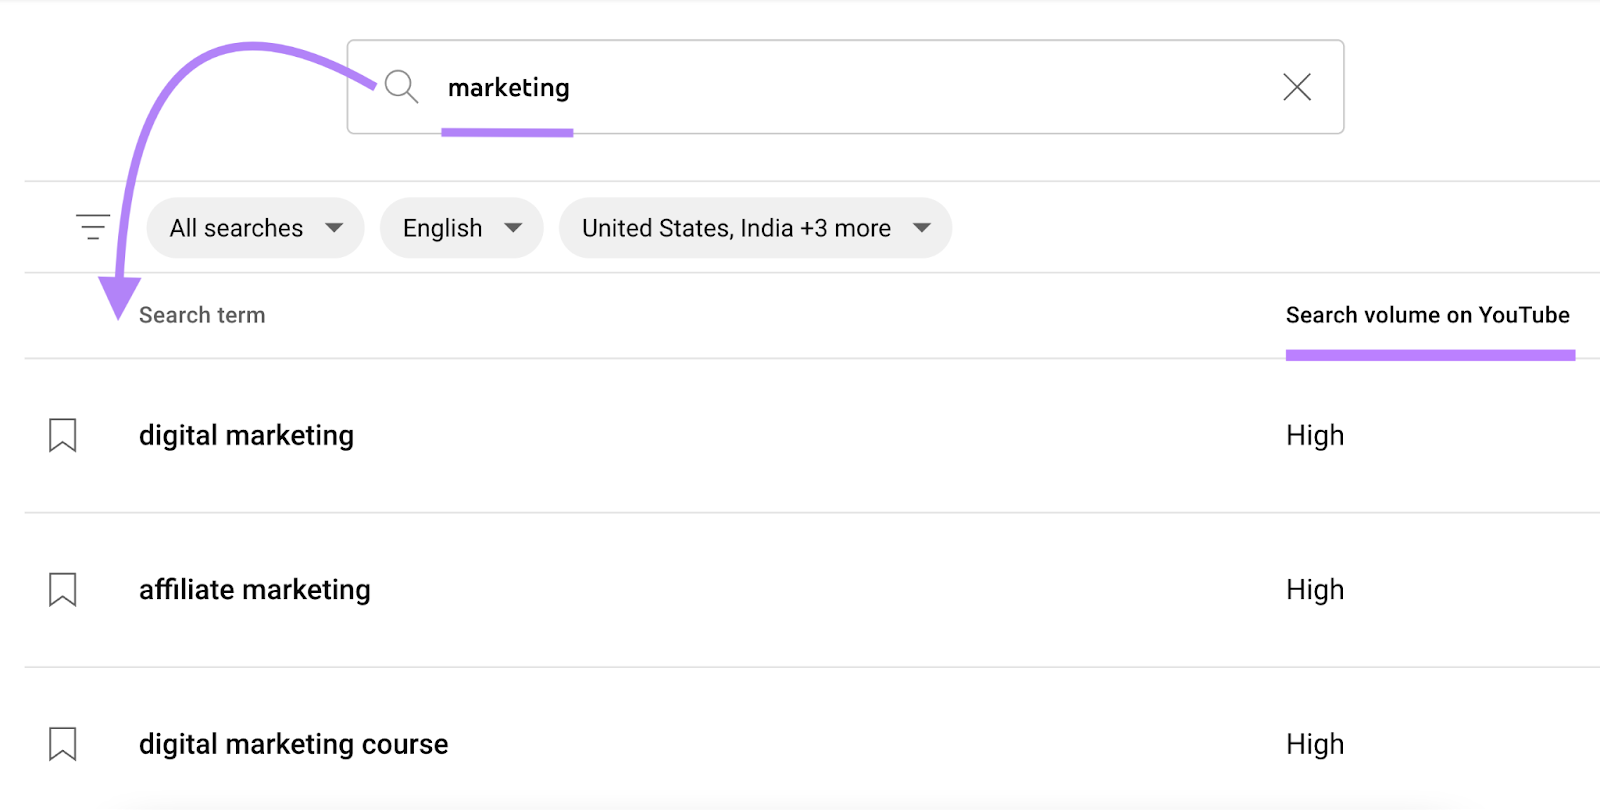 Related keywords for "marketing" including their search volume.